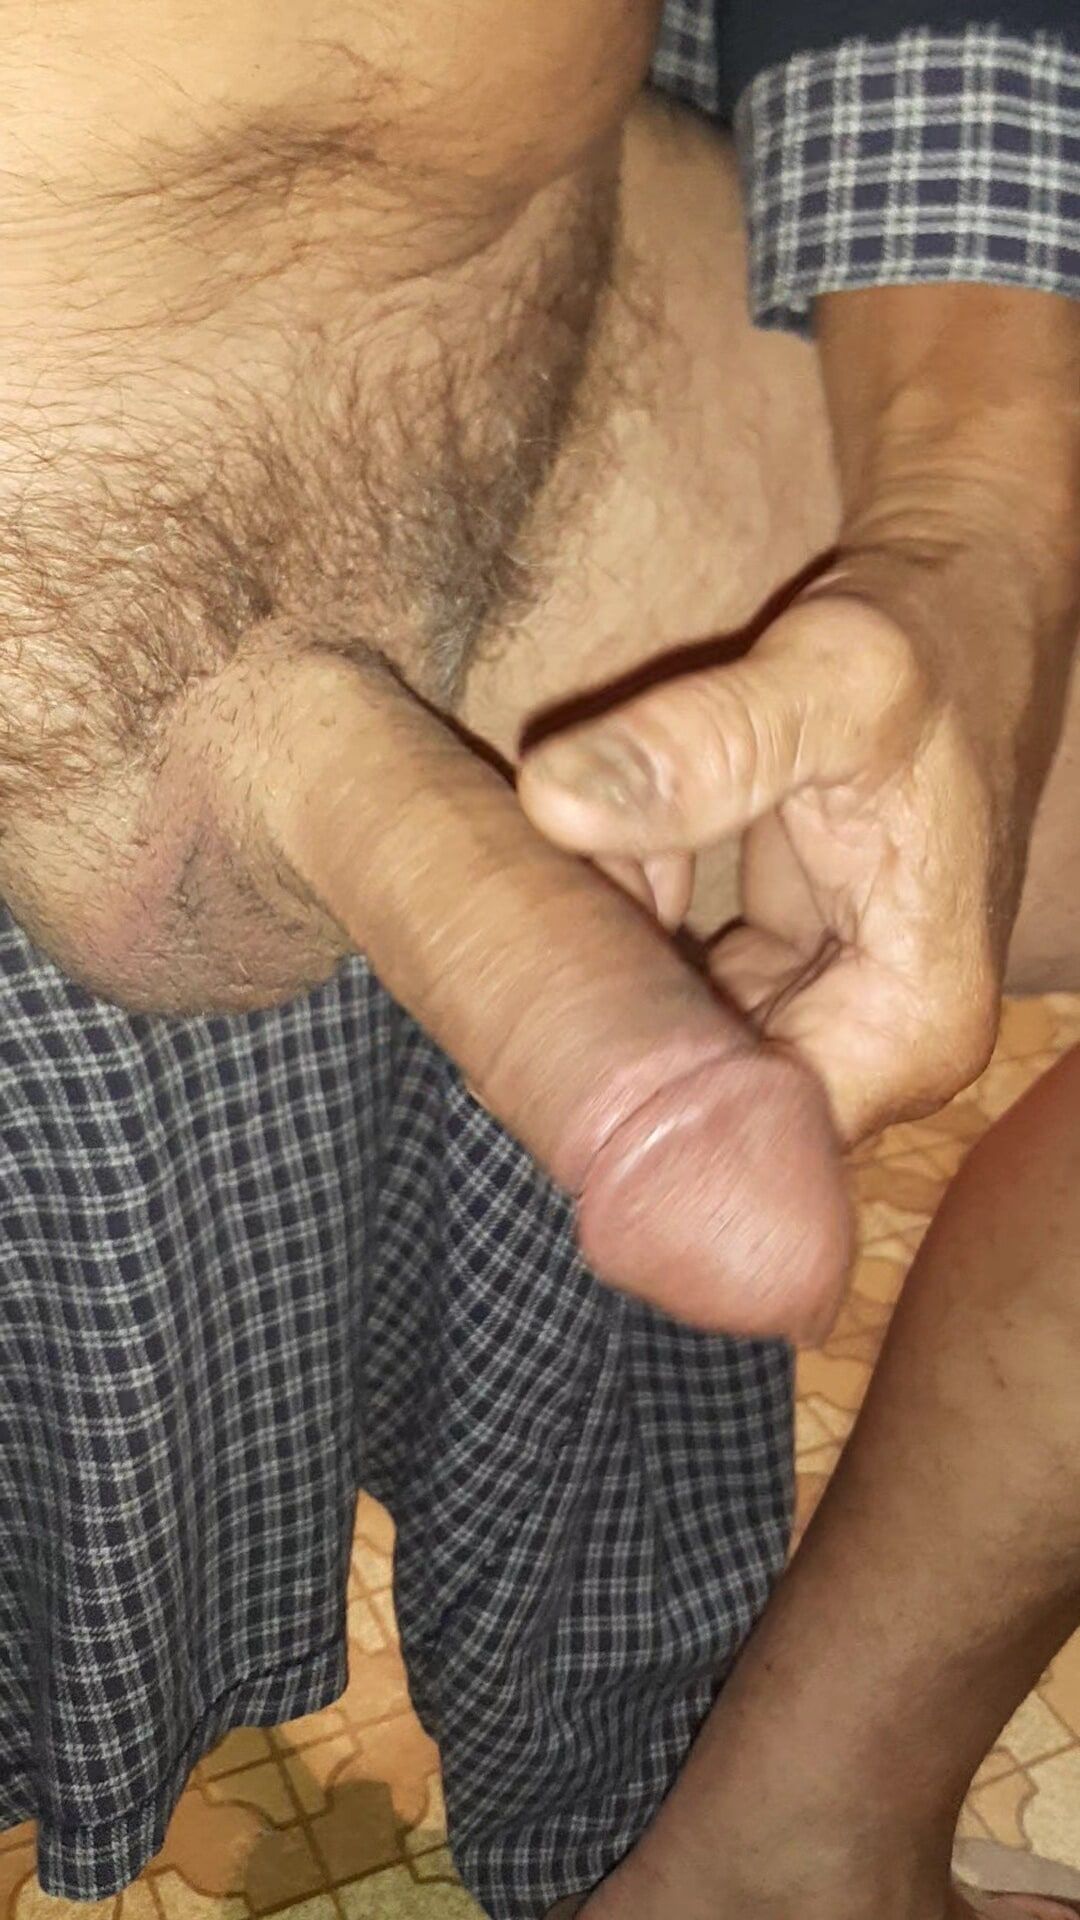 My cock #32